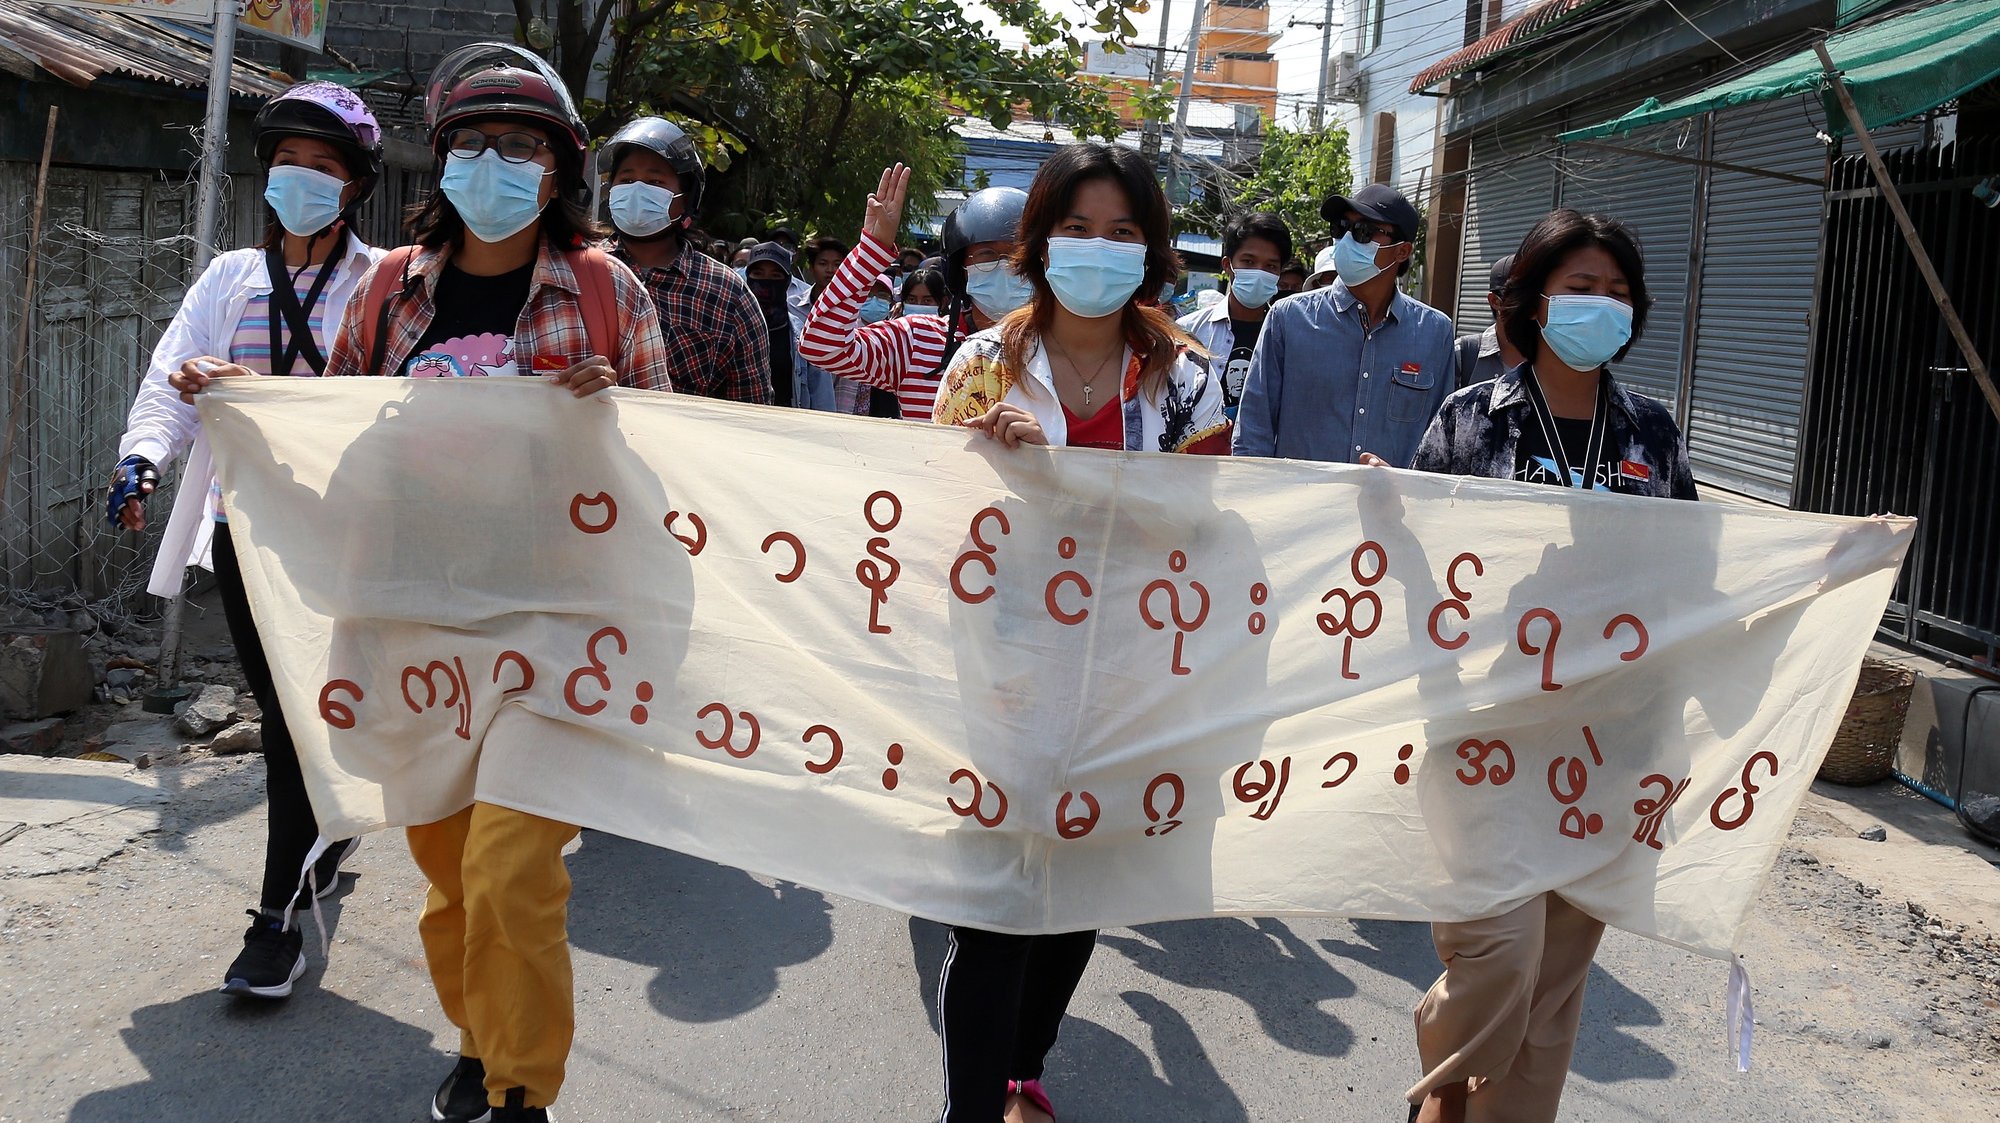 epa09123668 Demonstrators hold a banner reading &#039;All Burma Federation of the Student Unions&#039; during an anti-military coup protest in Mandalay, Myanmar, 09 April 2021. According to the Assistance Association for Political Prisoners (AAPP), at least 570 people have been killed by Myanmar armed forces since the military seized power on 01 February 2021 while protests continue despite the intensifying crackdown on demonstrators.  EPA/STRINGER